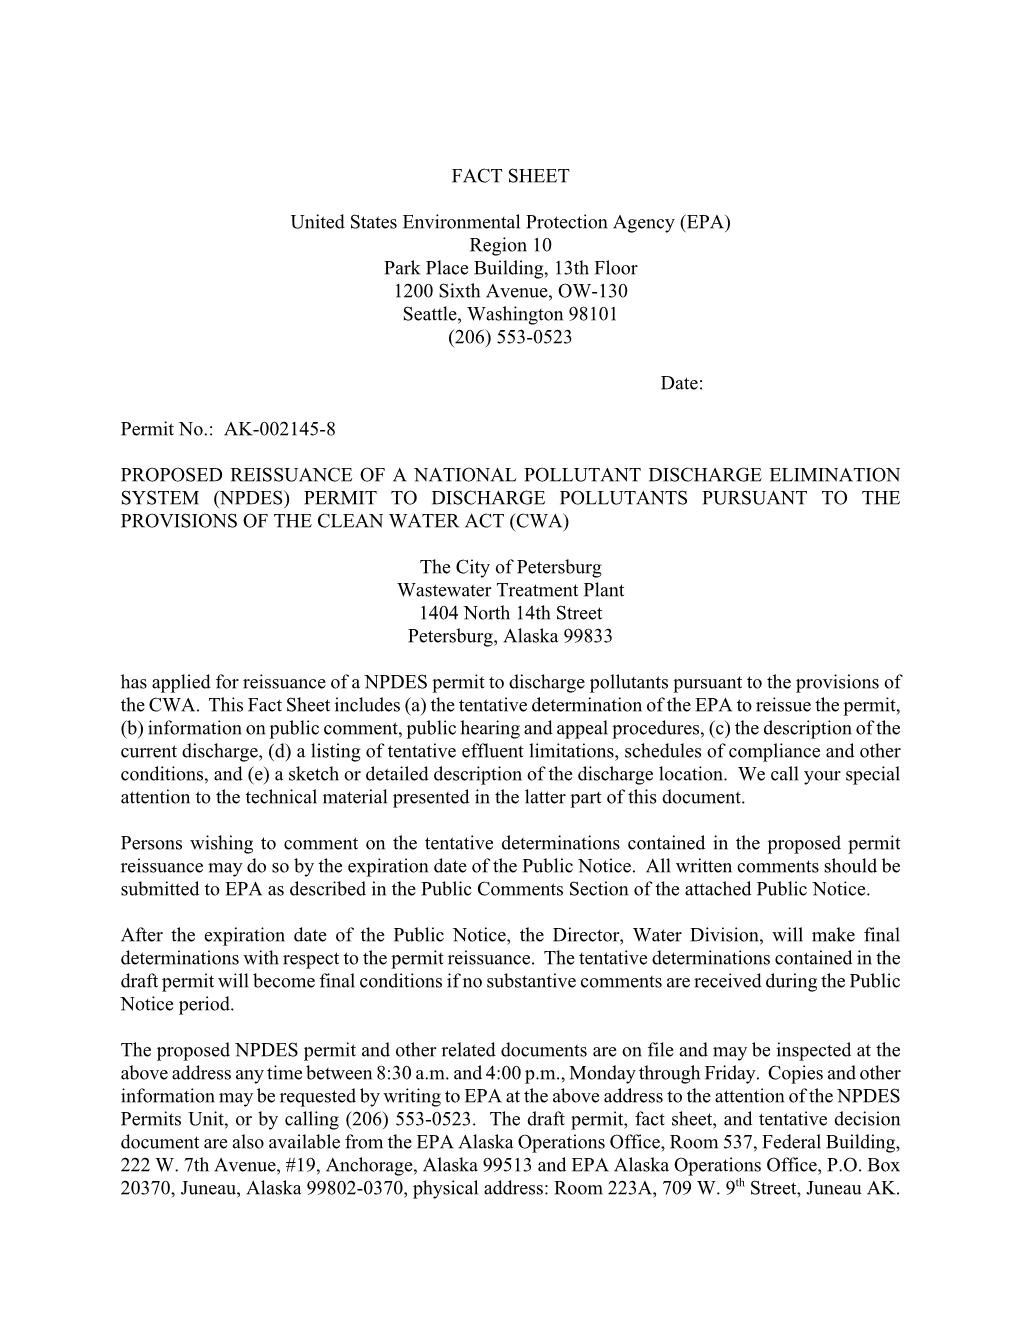 The City of Petersburg WWTP, NPDES Permit #AK0021458